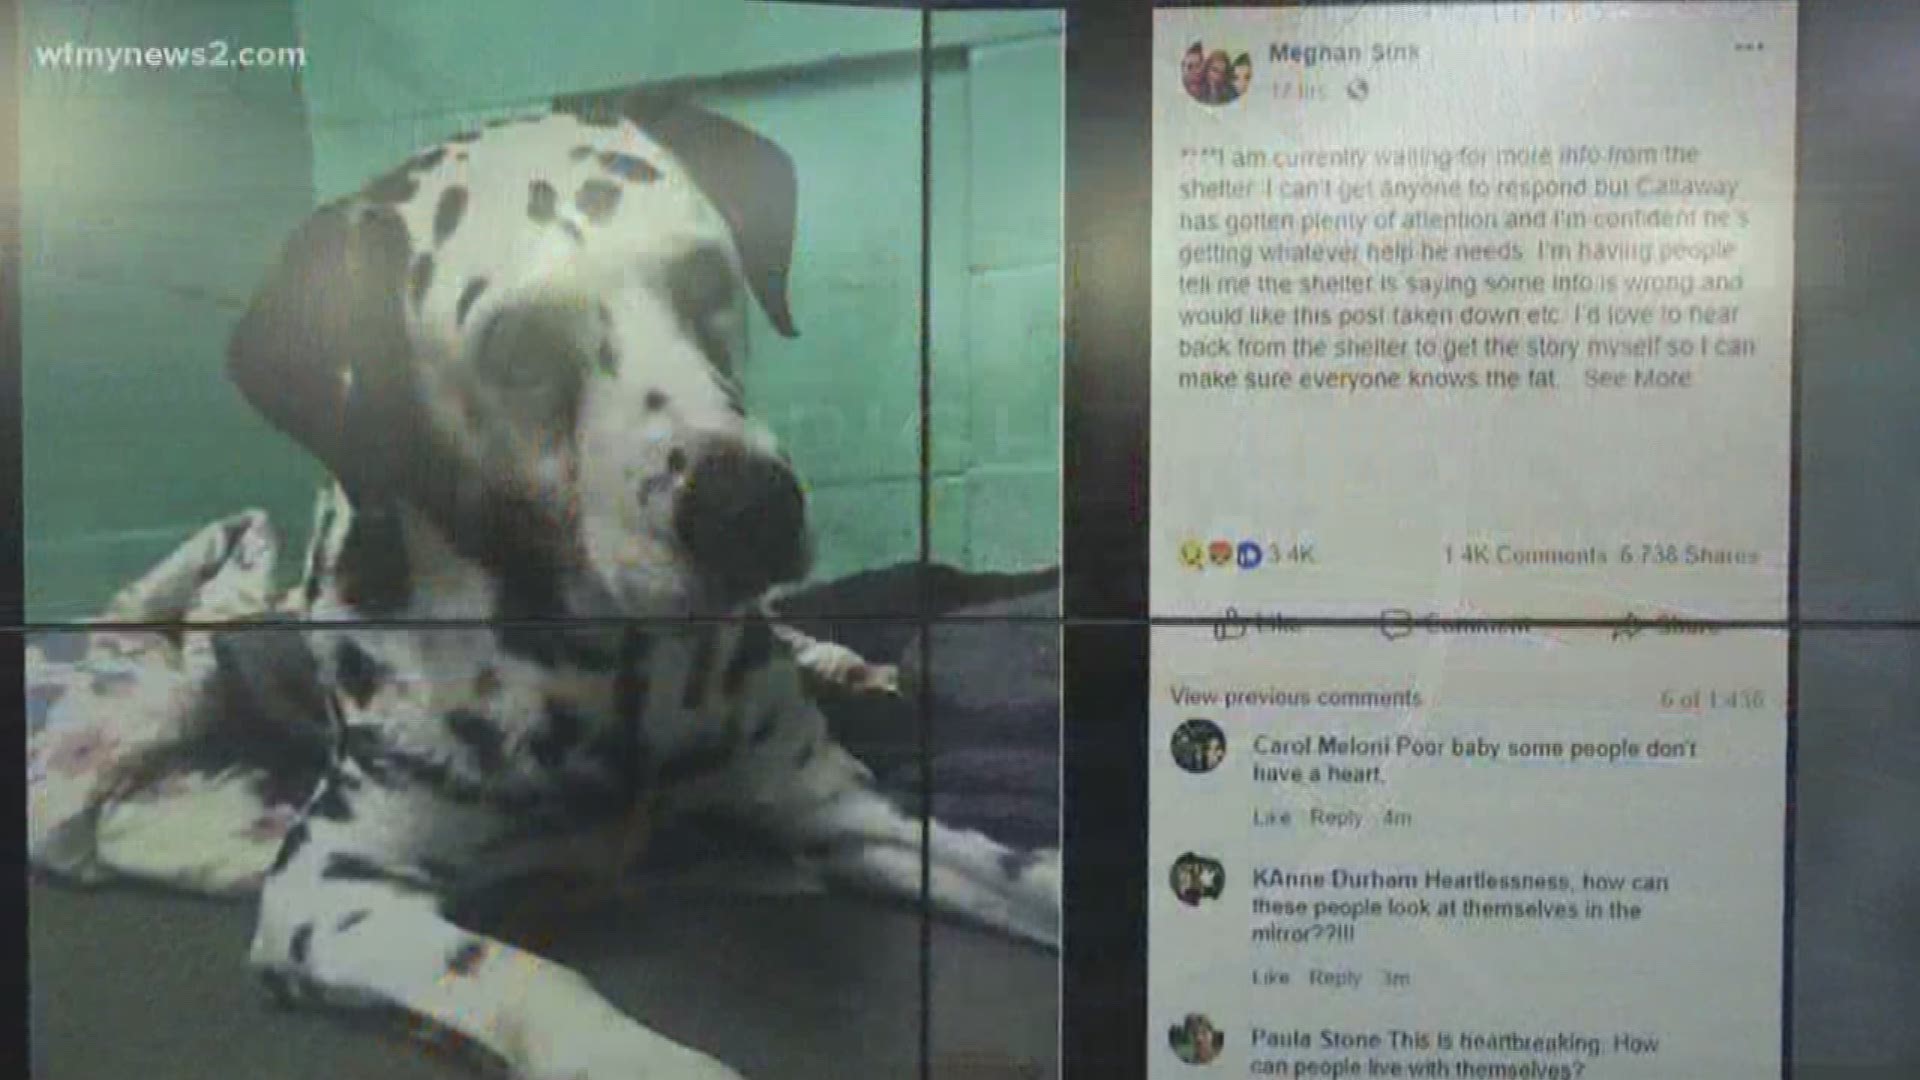 A dog was abandoned at Guilford County Animal Services but the director says they're still trying to track down the owner. They don't have that information or any of the dog's past medical records, so they're treating him like a stray for the time being.